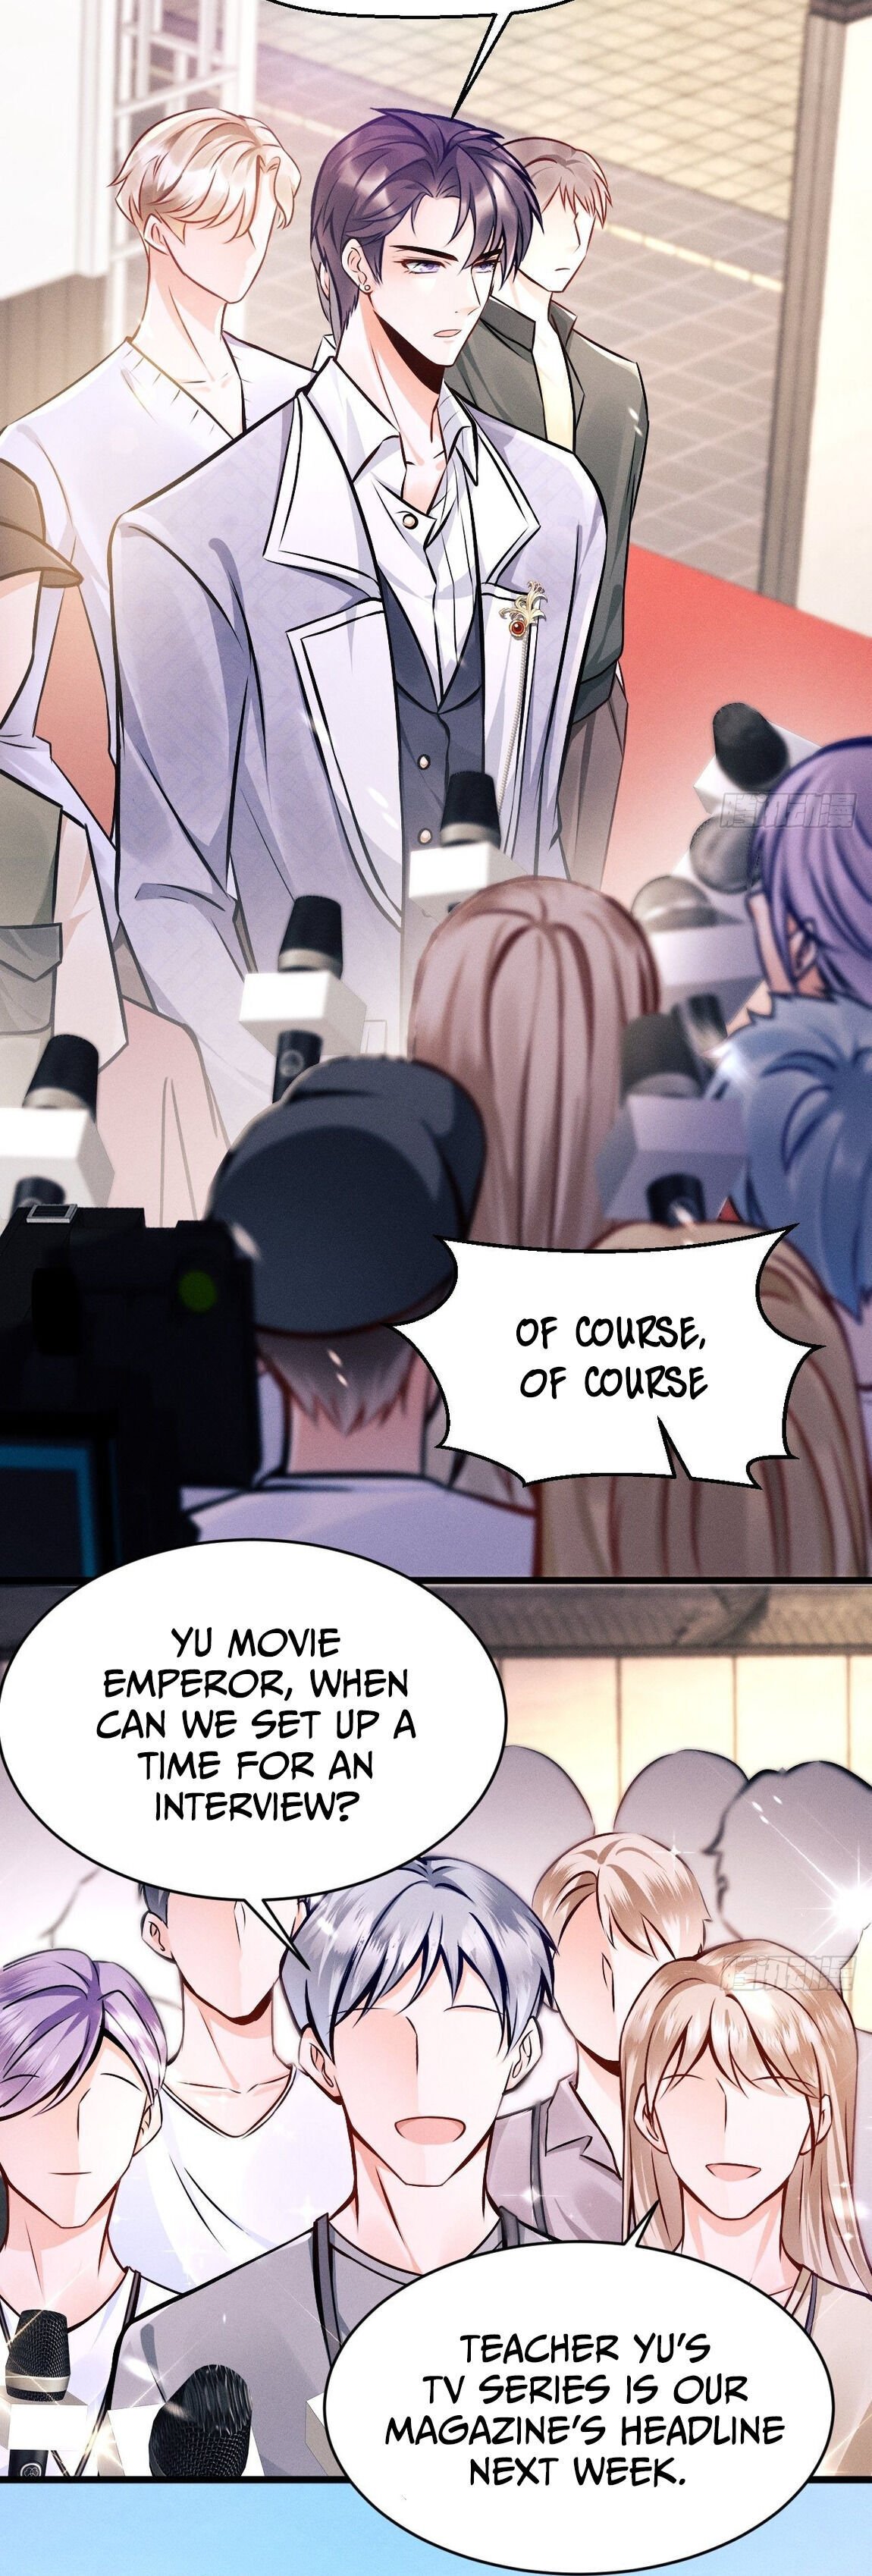 I suspect the movie emperor is luring me chapter 1